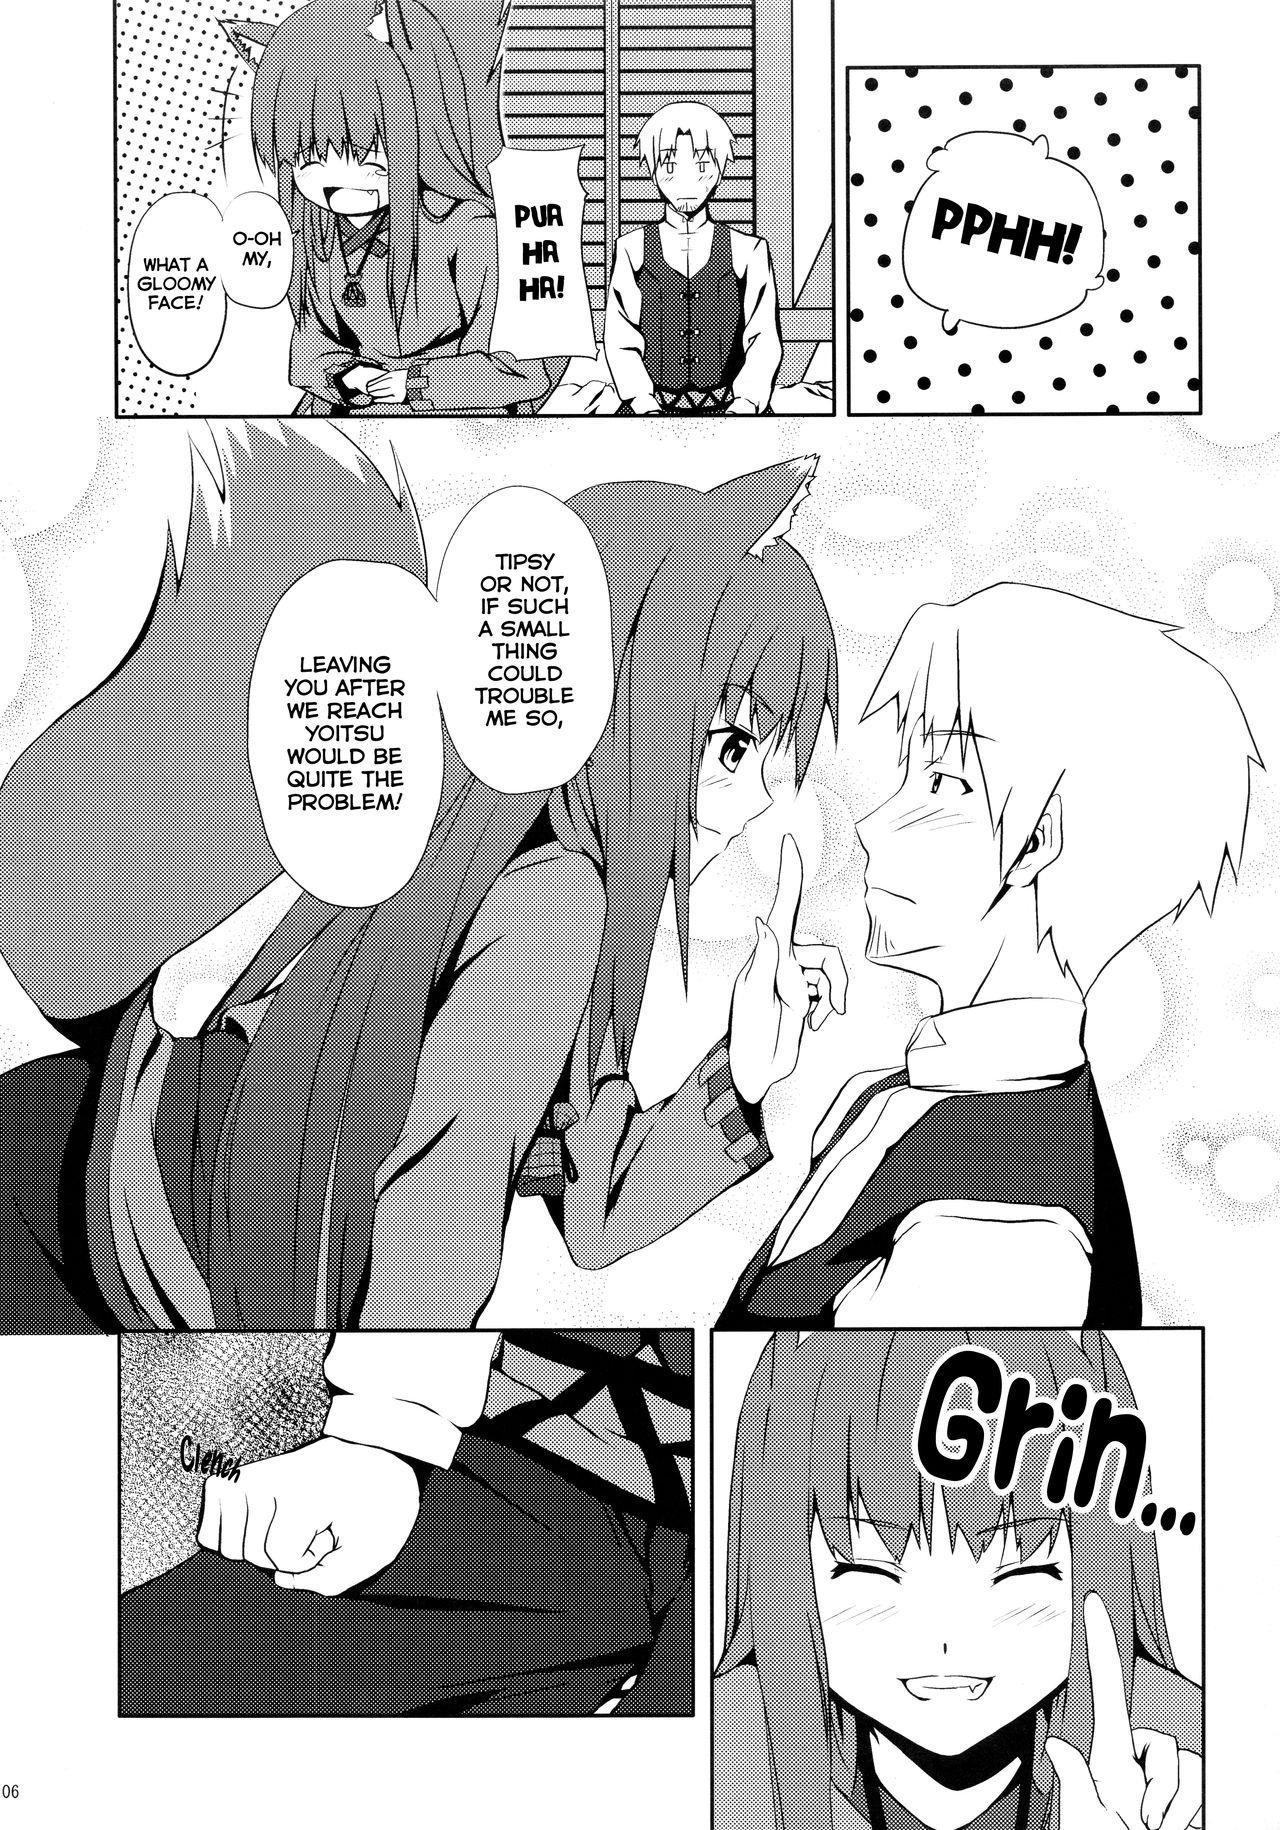 Korea Bitter Apple - Spice and wolf Throat - Page 6